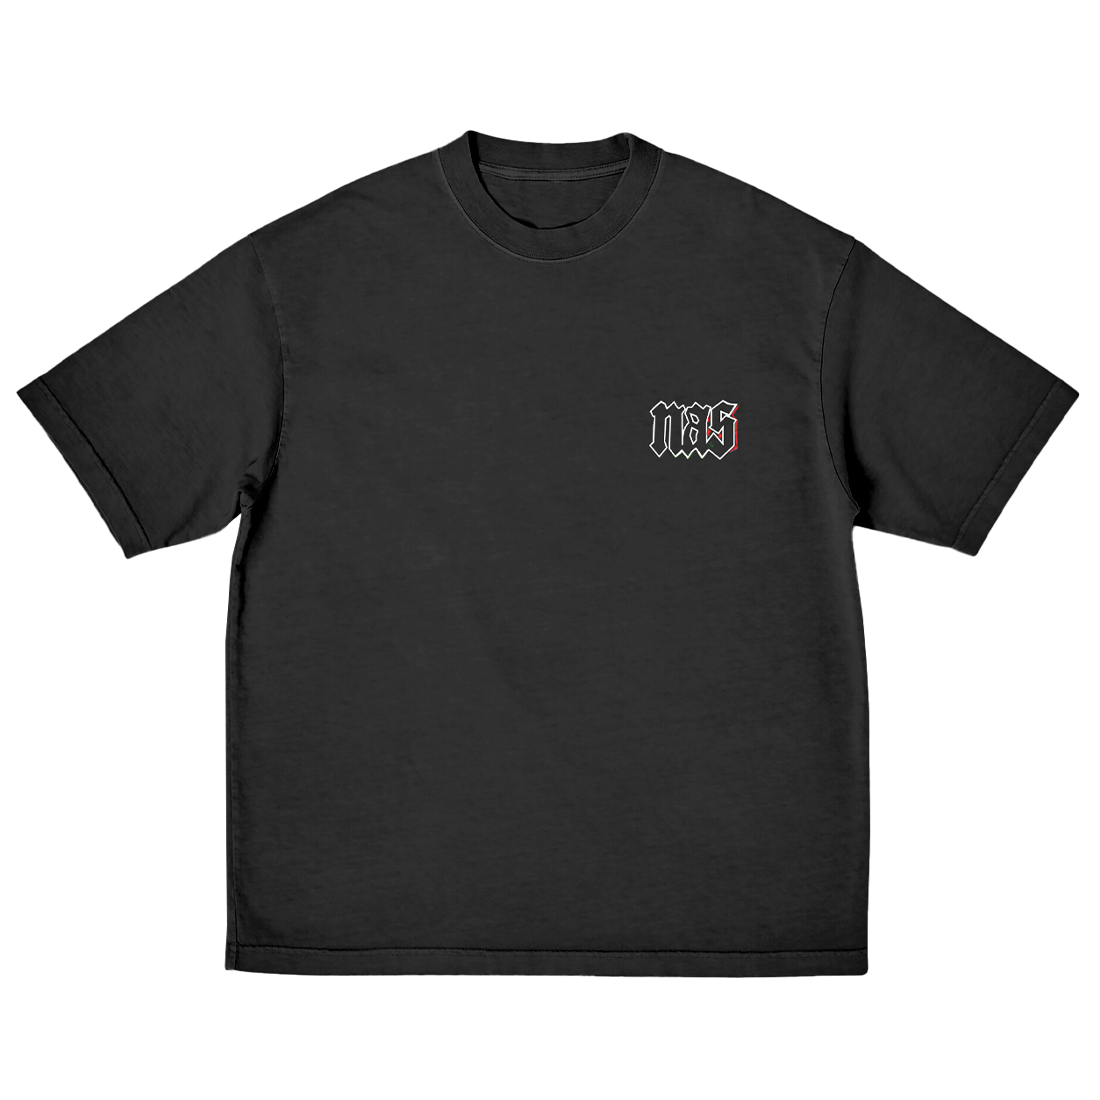 Black T-shirt with a small logo on the left chest area related to music